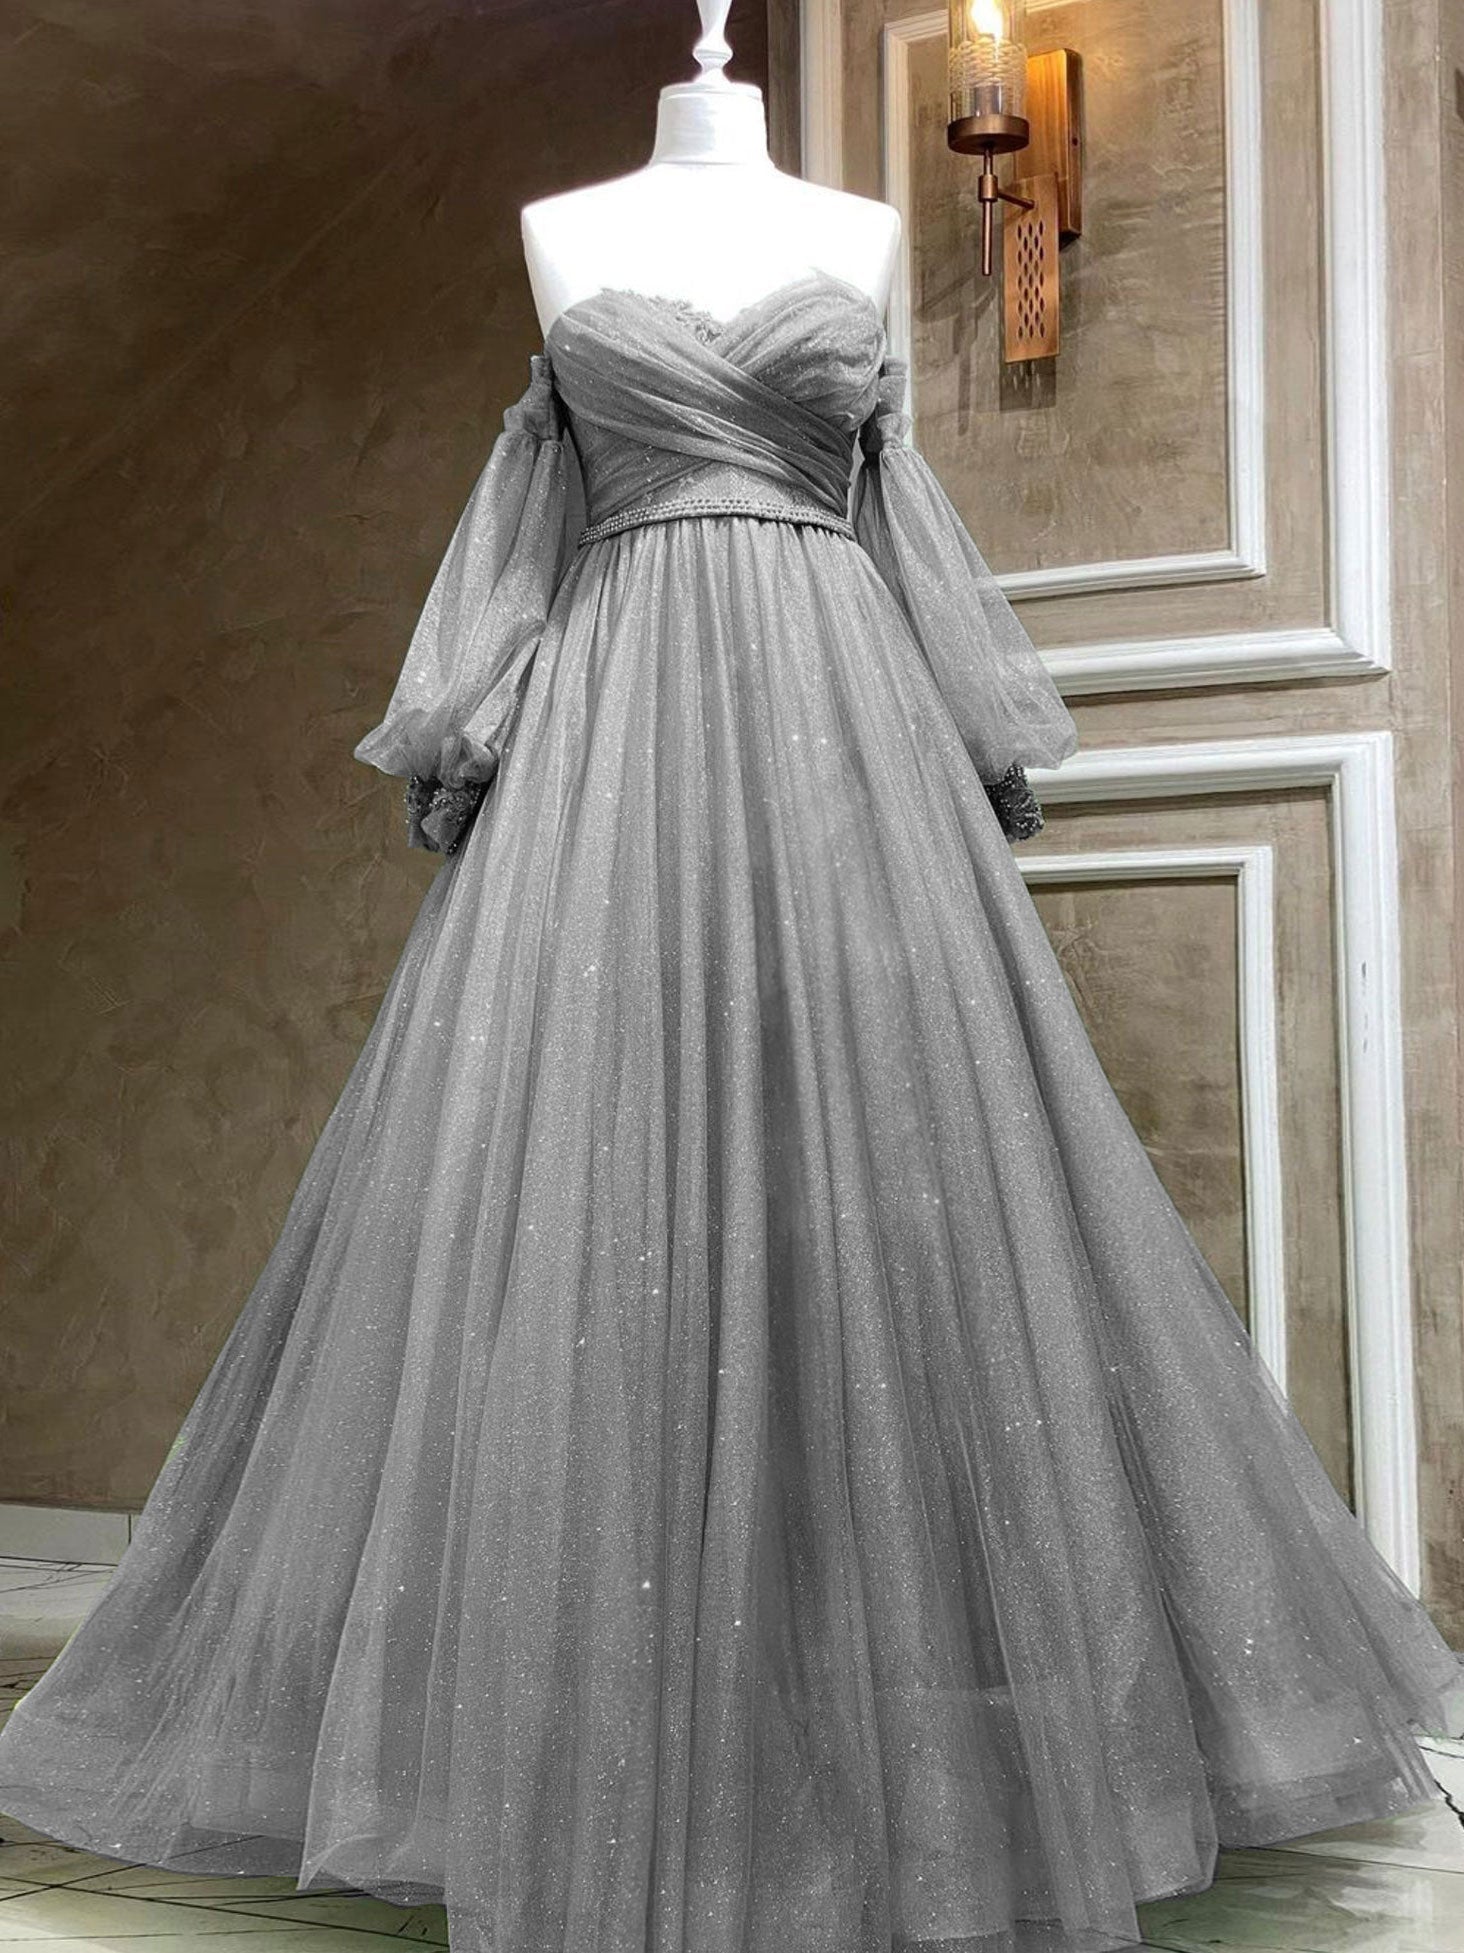 Homecomming Dresses Blue, A-Line Sweetheart Neck Tulle Green Long Prom Dress, Green Formal Evening Dress